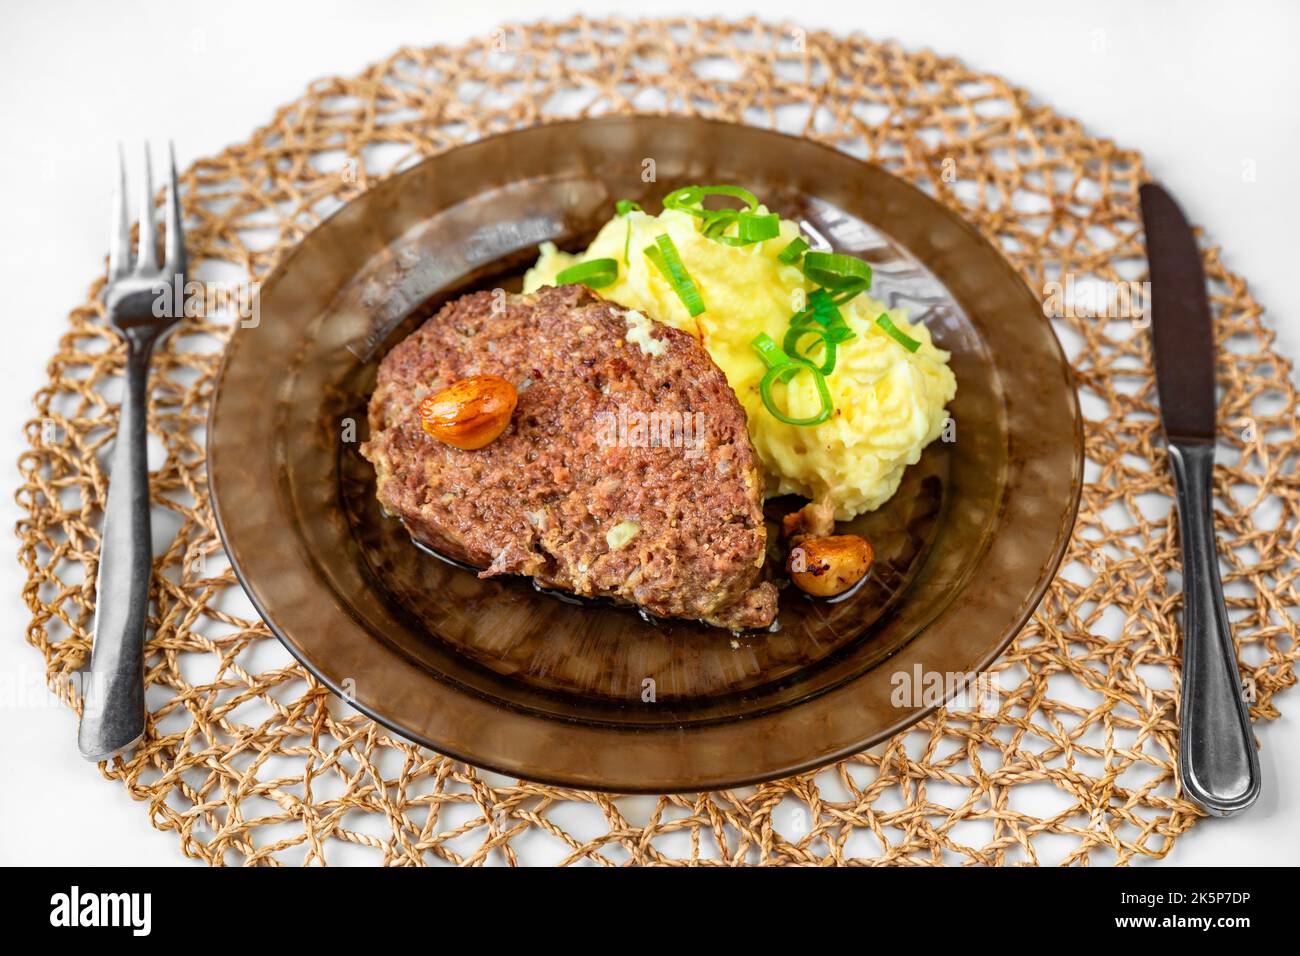 Baked minced beef, garlic and mashed potato on plate, cutlery and bamboo pad on table. Serving size, lunch or dinner. Stock Photo